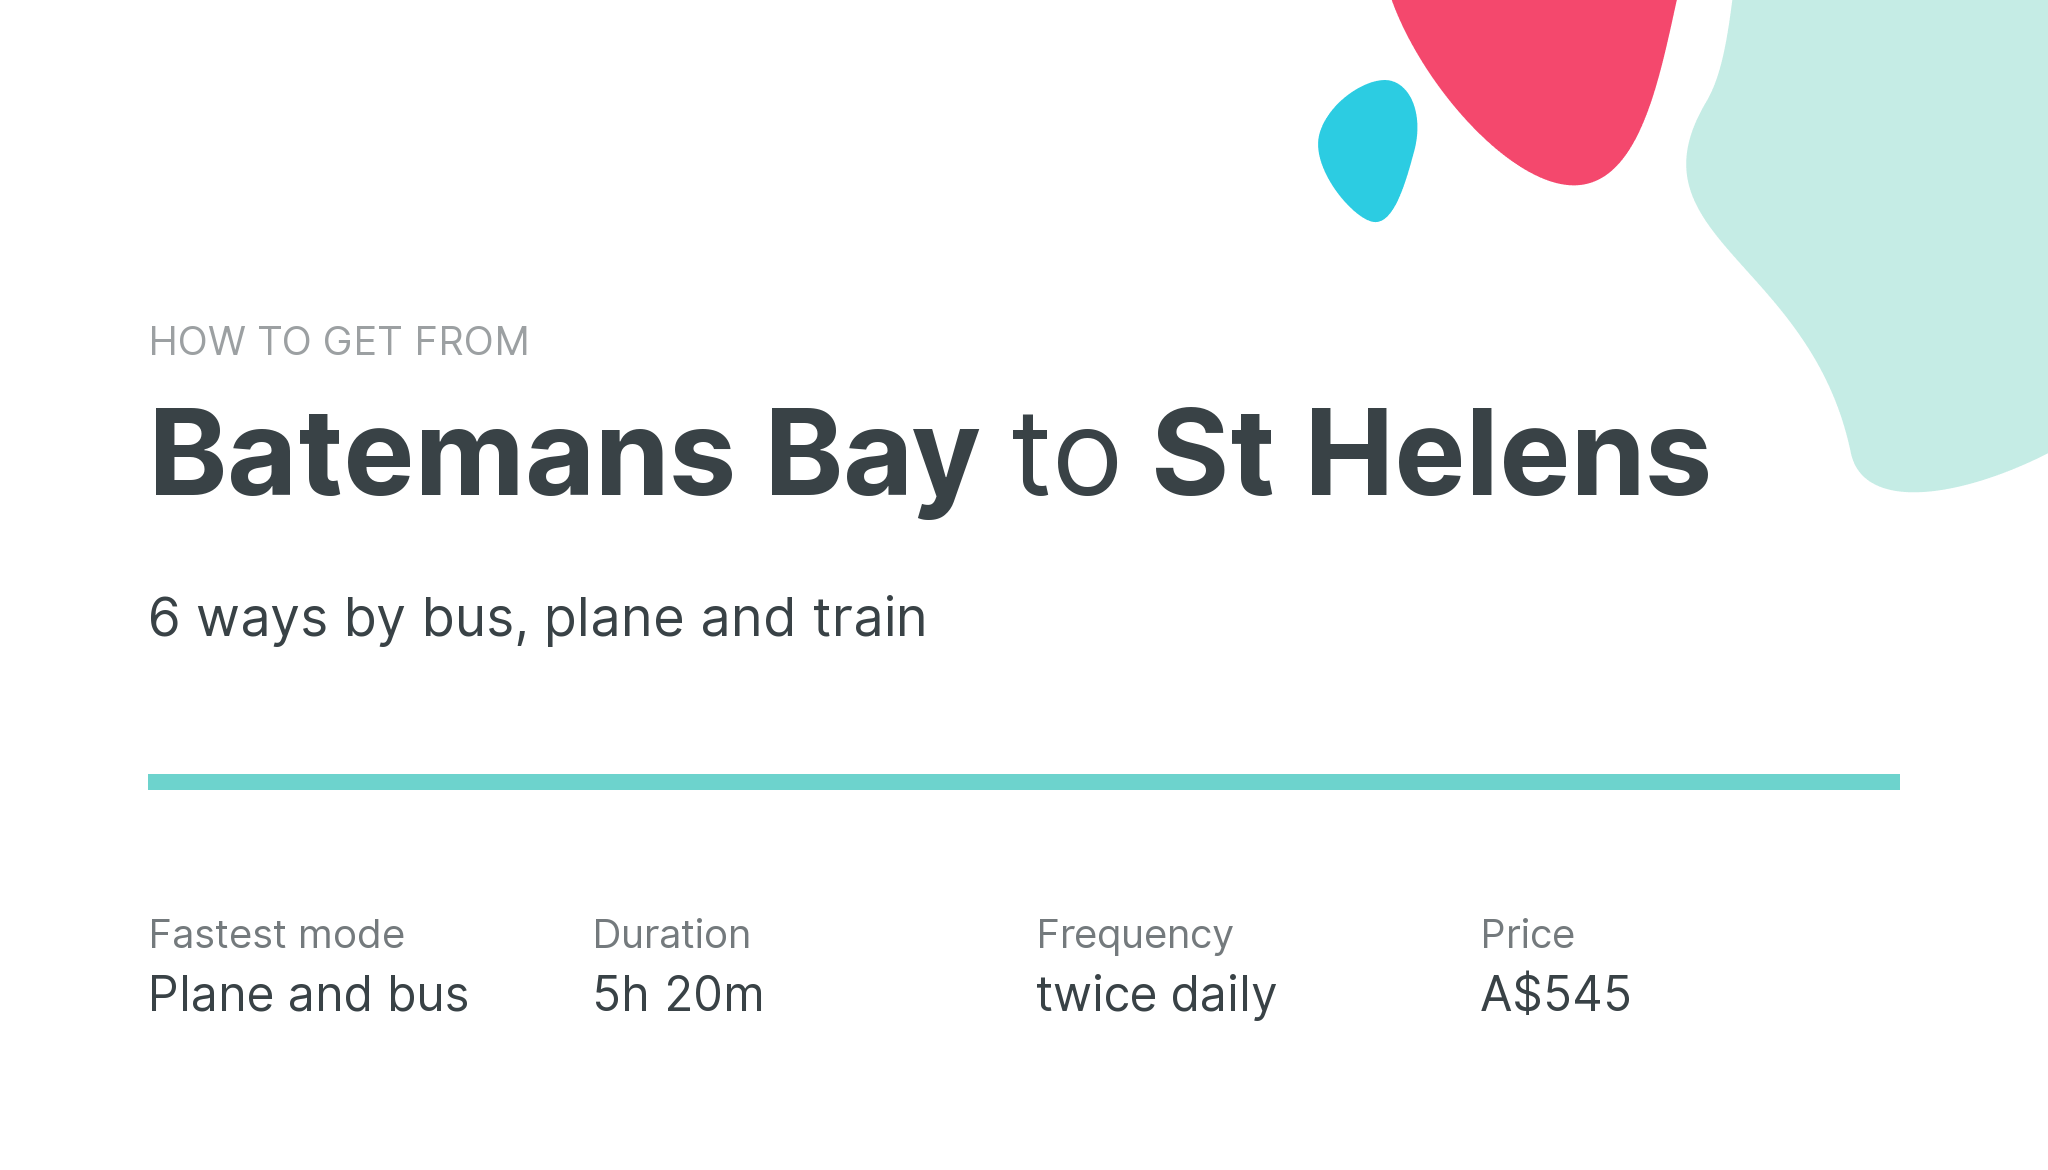 How do I get from Batemans Bay to St Helens